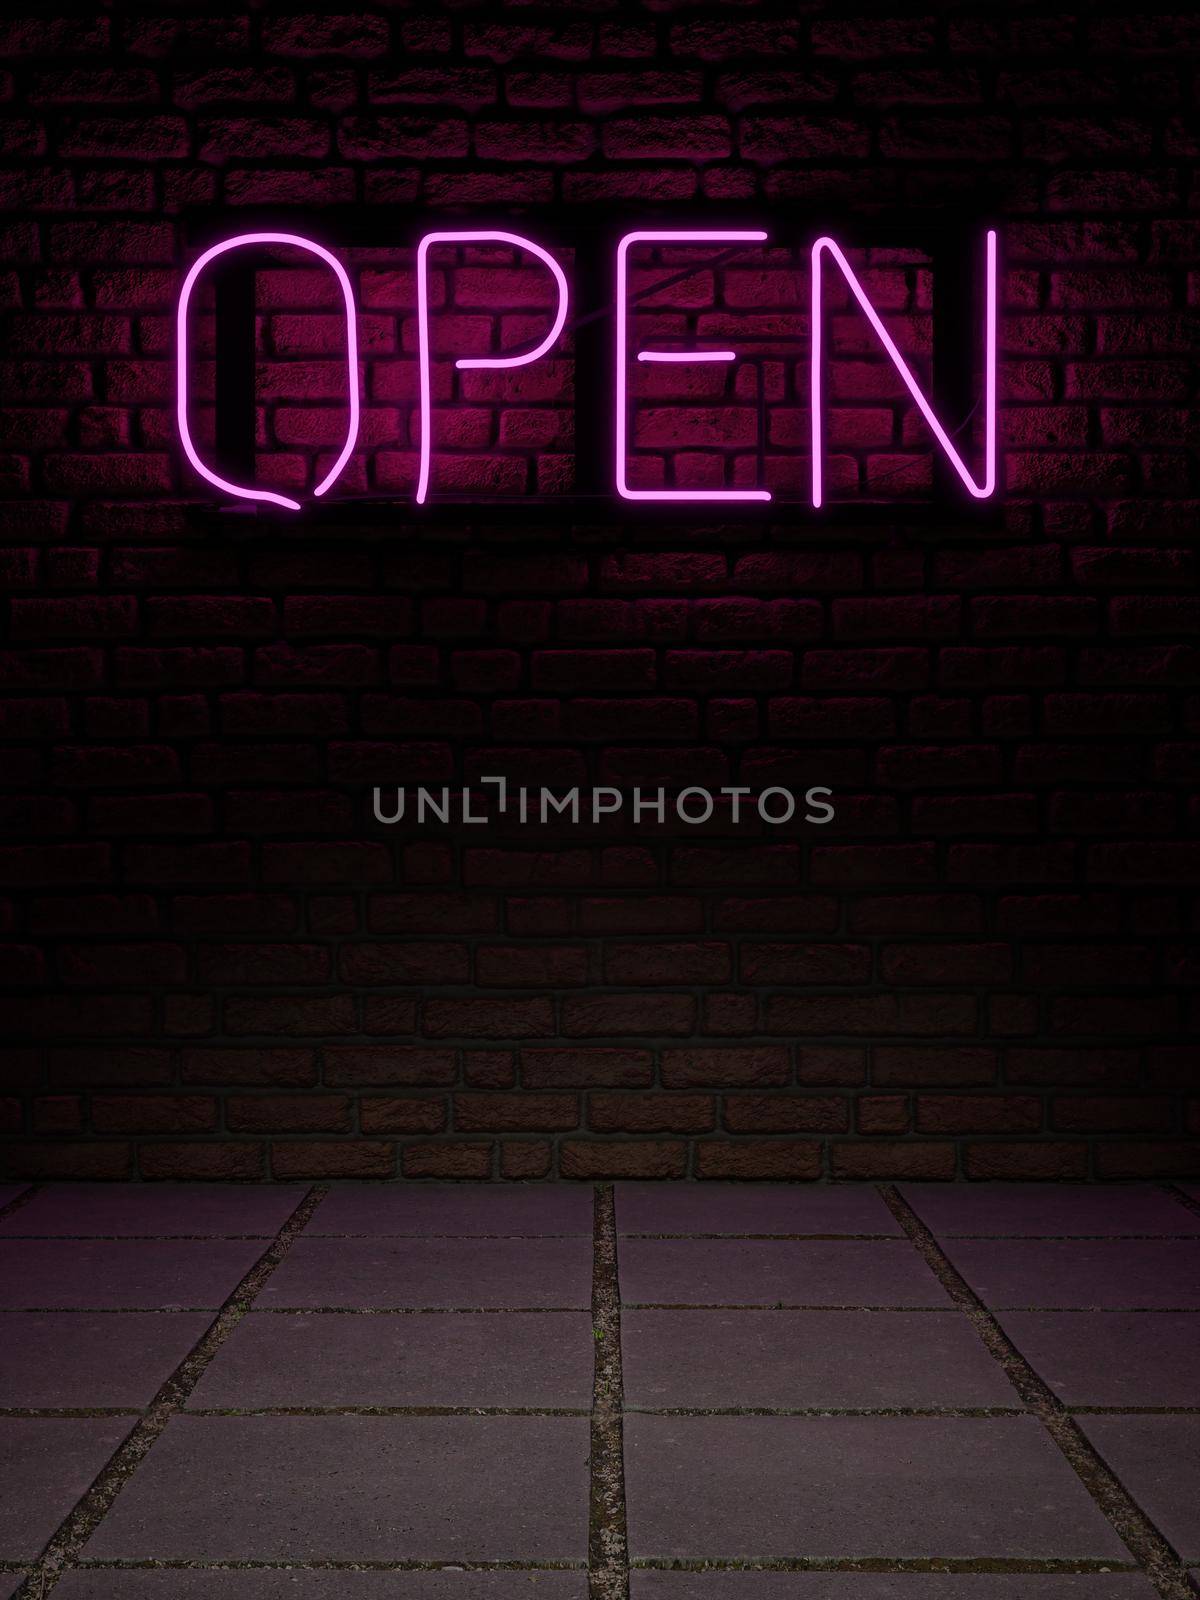 3d representation of a neon sign with the word "open" by asolano